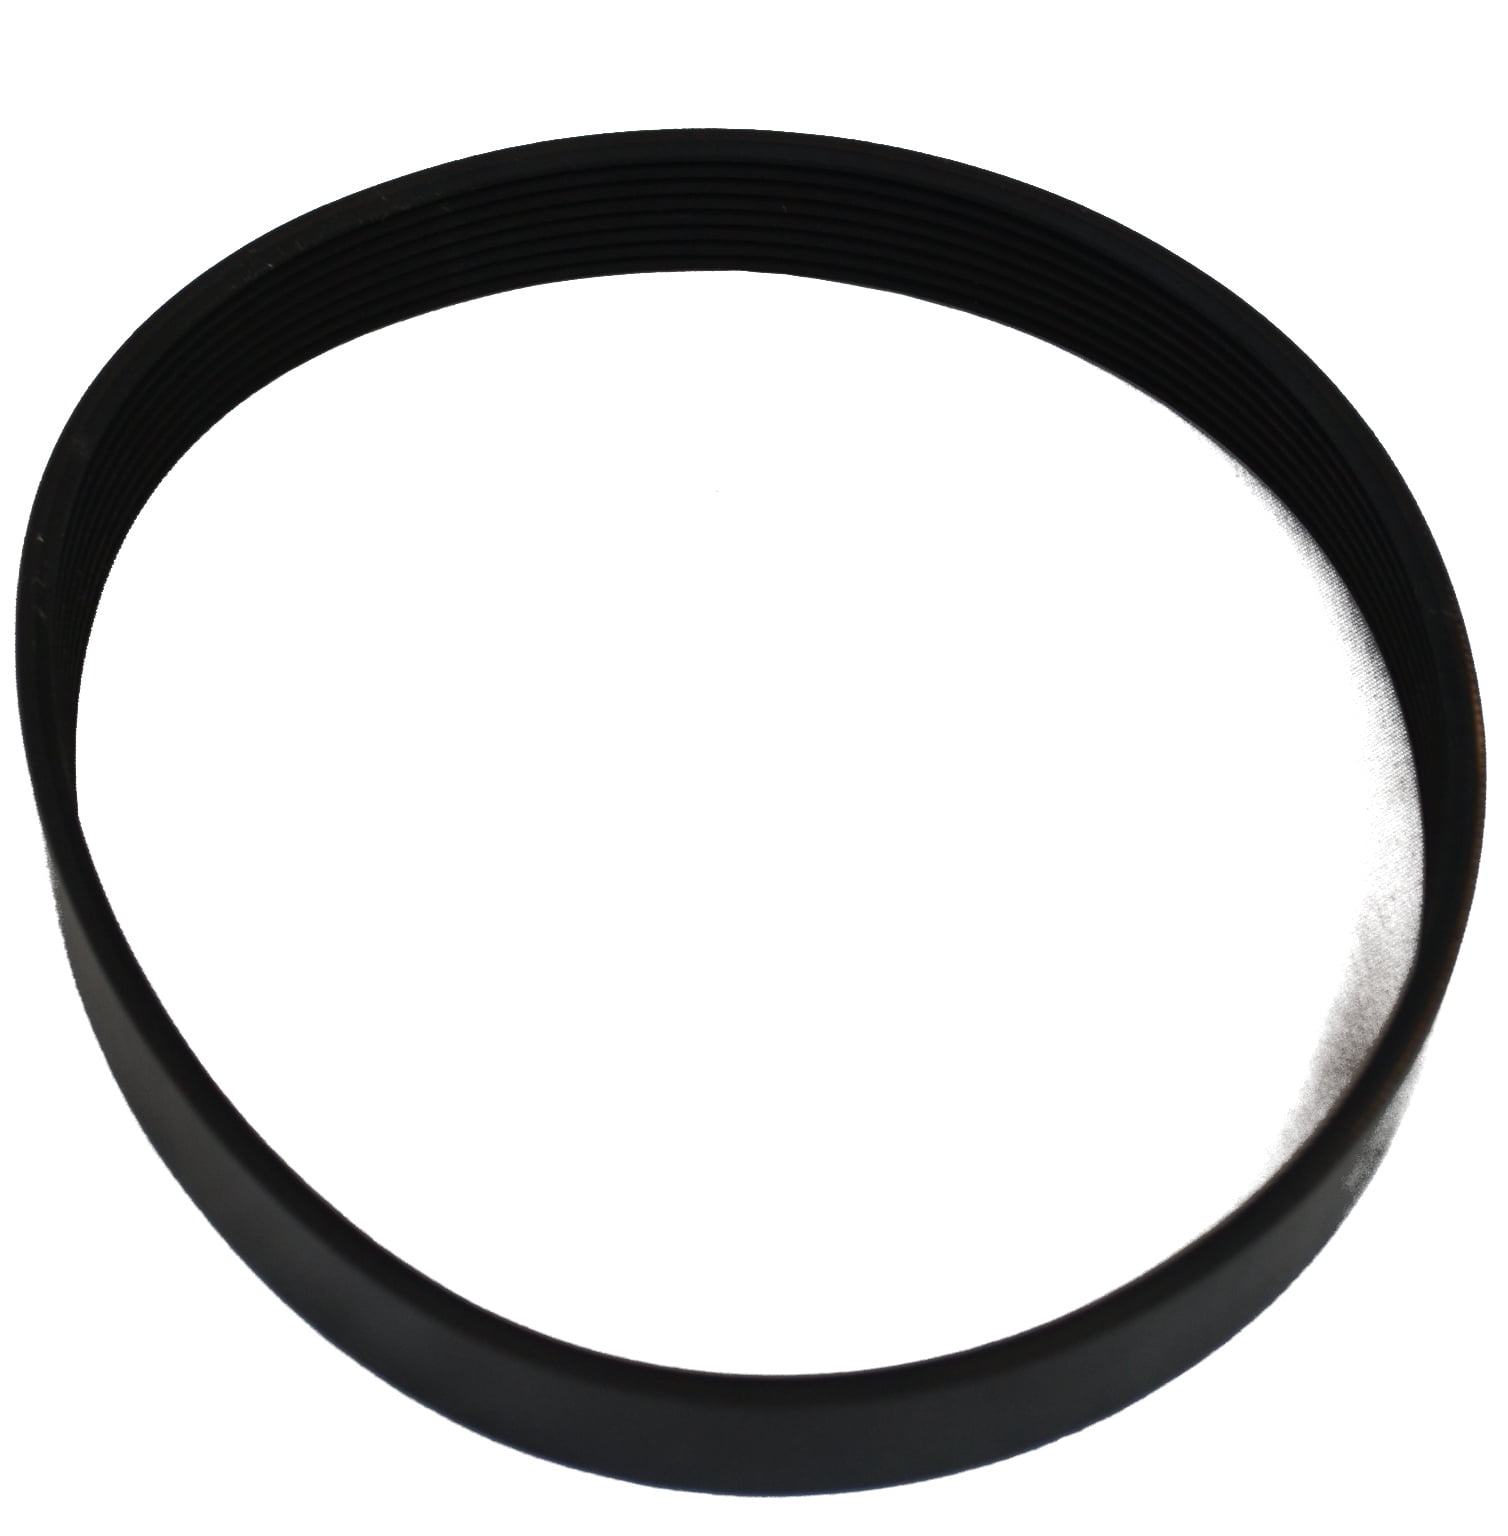 Pack of 5 OCSParts PJ373 Replacement Belt for Husky Air Compressors 0.5"